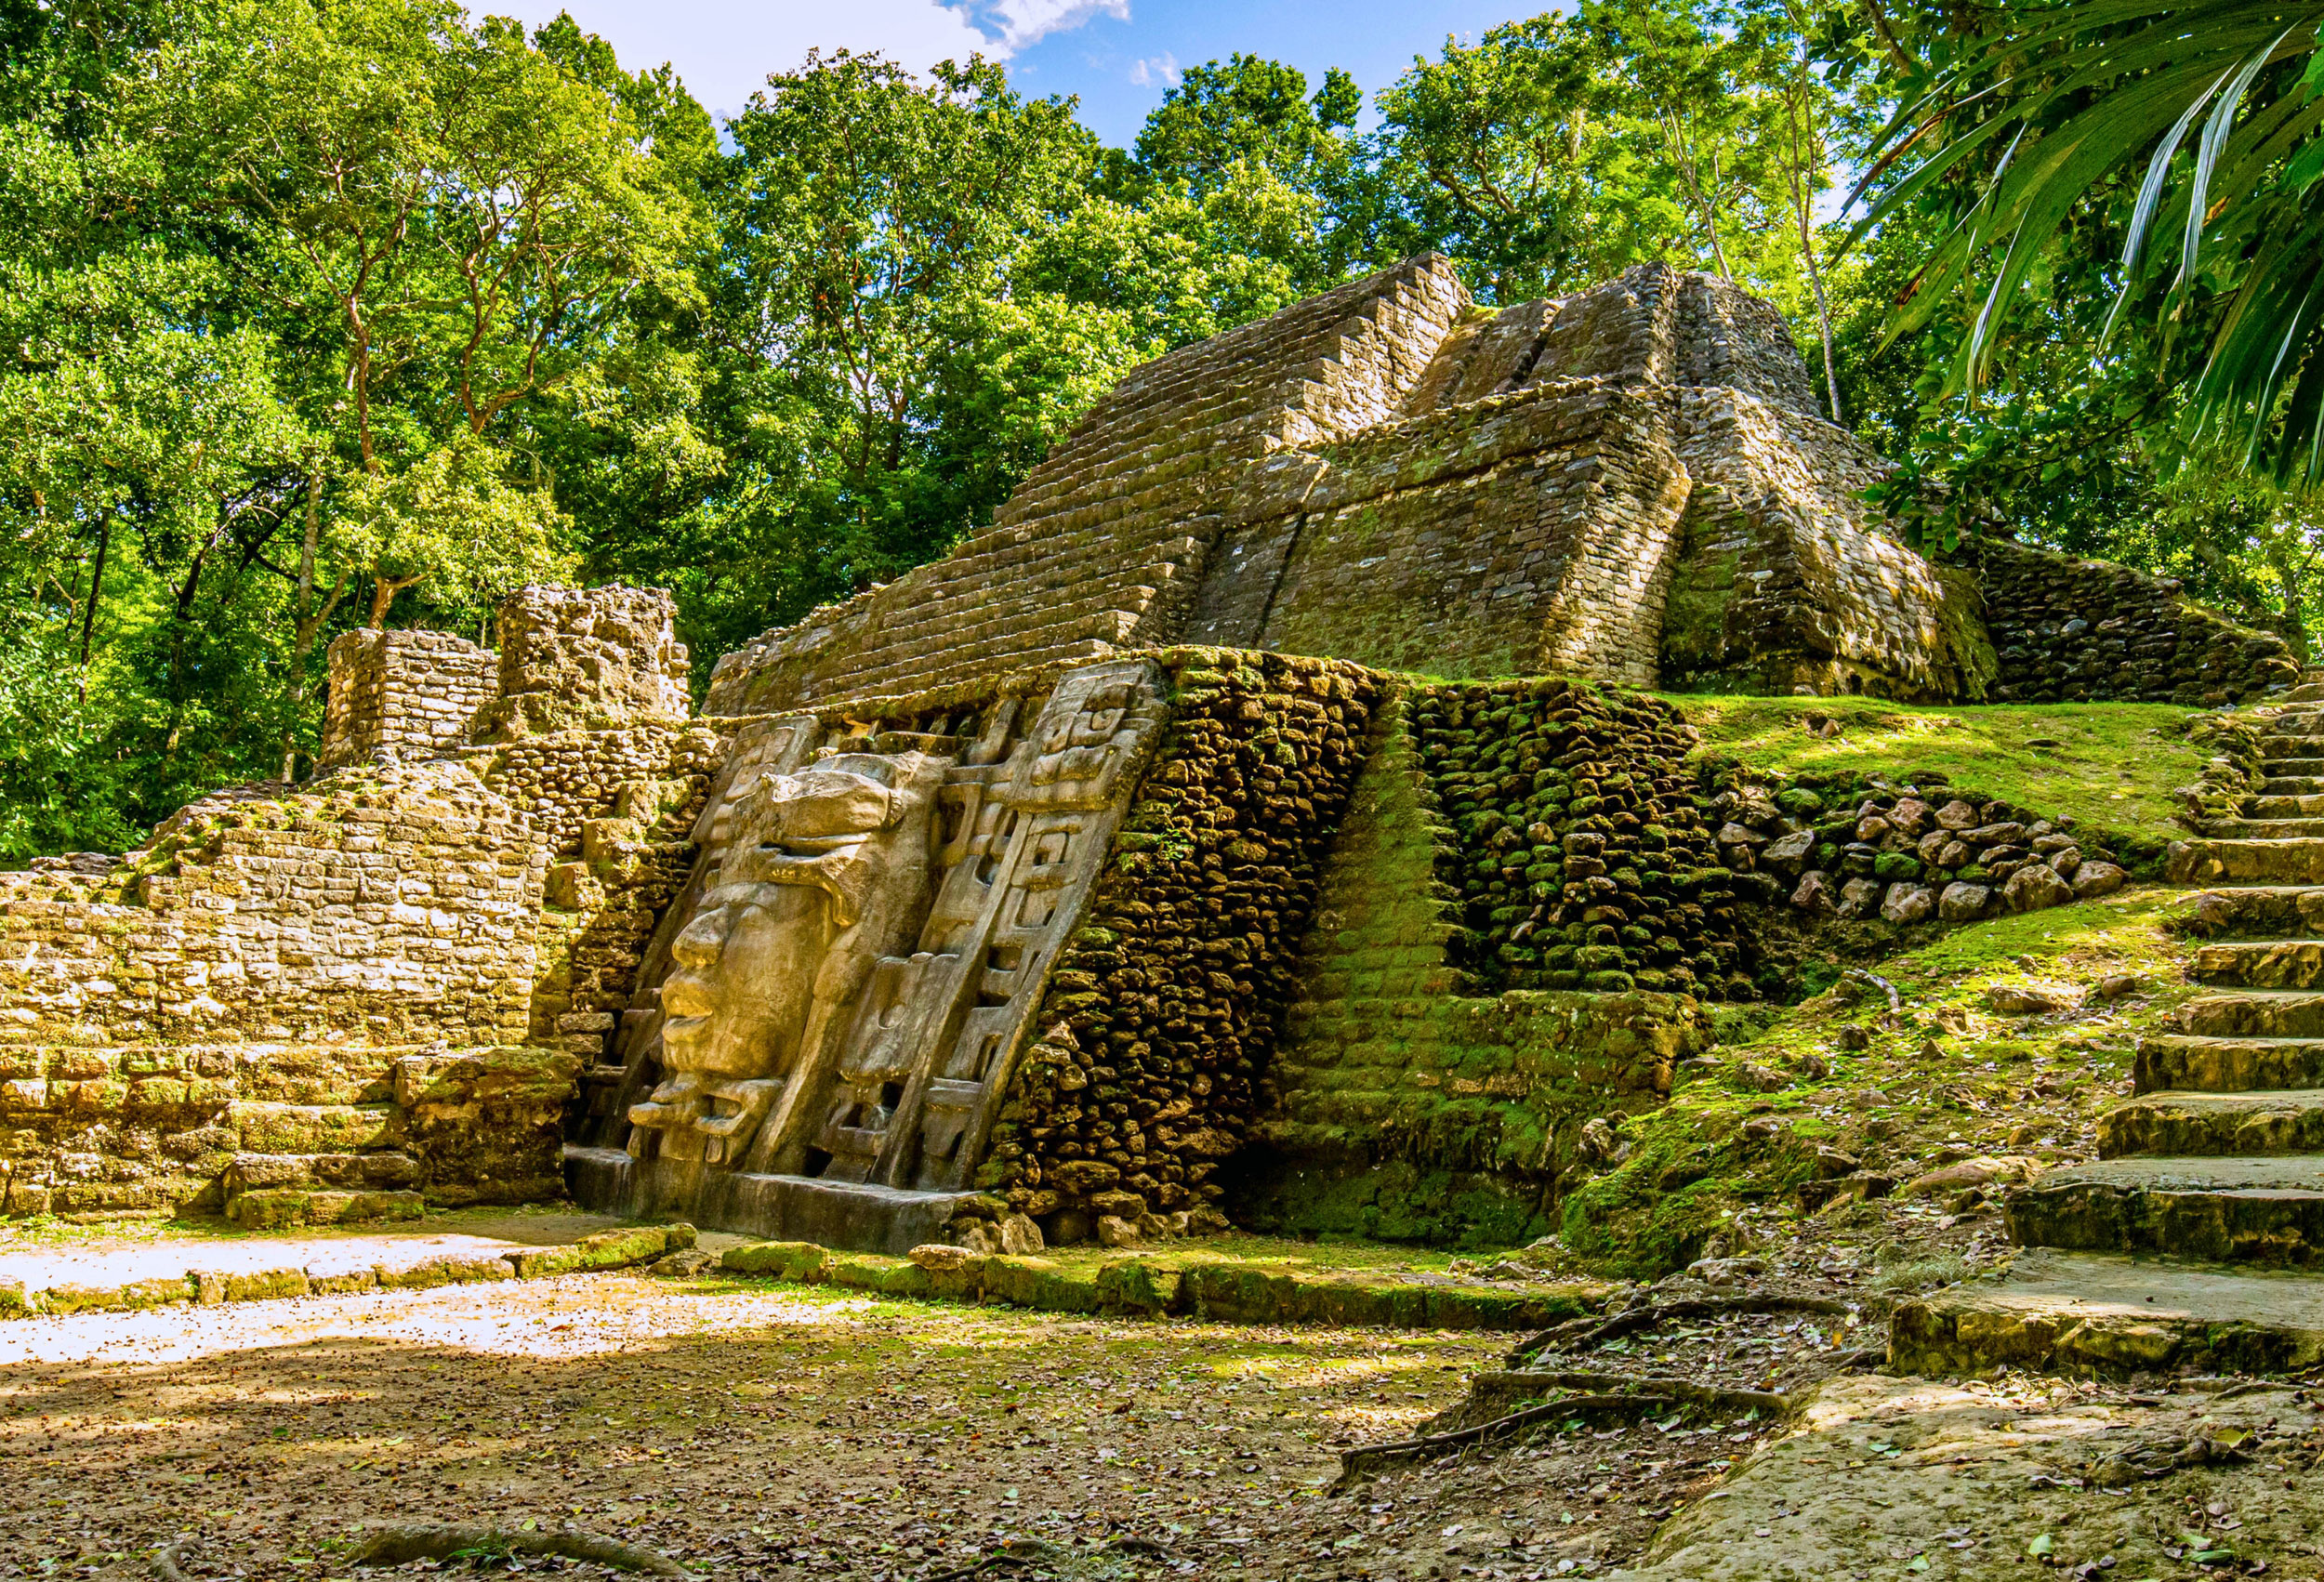 The Mask Temple at Lamanai, Belize, photo: Gummy Bone, Getty Images